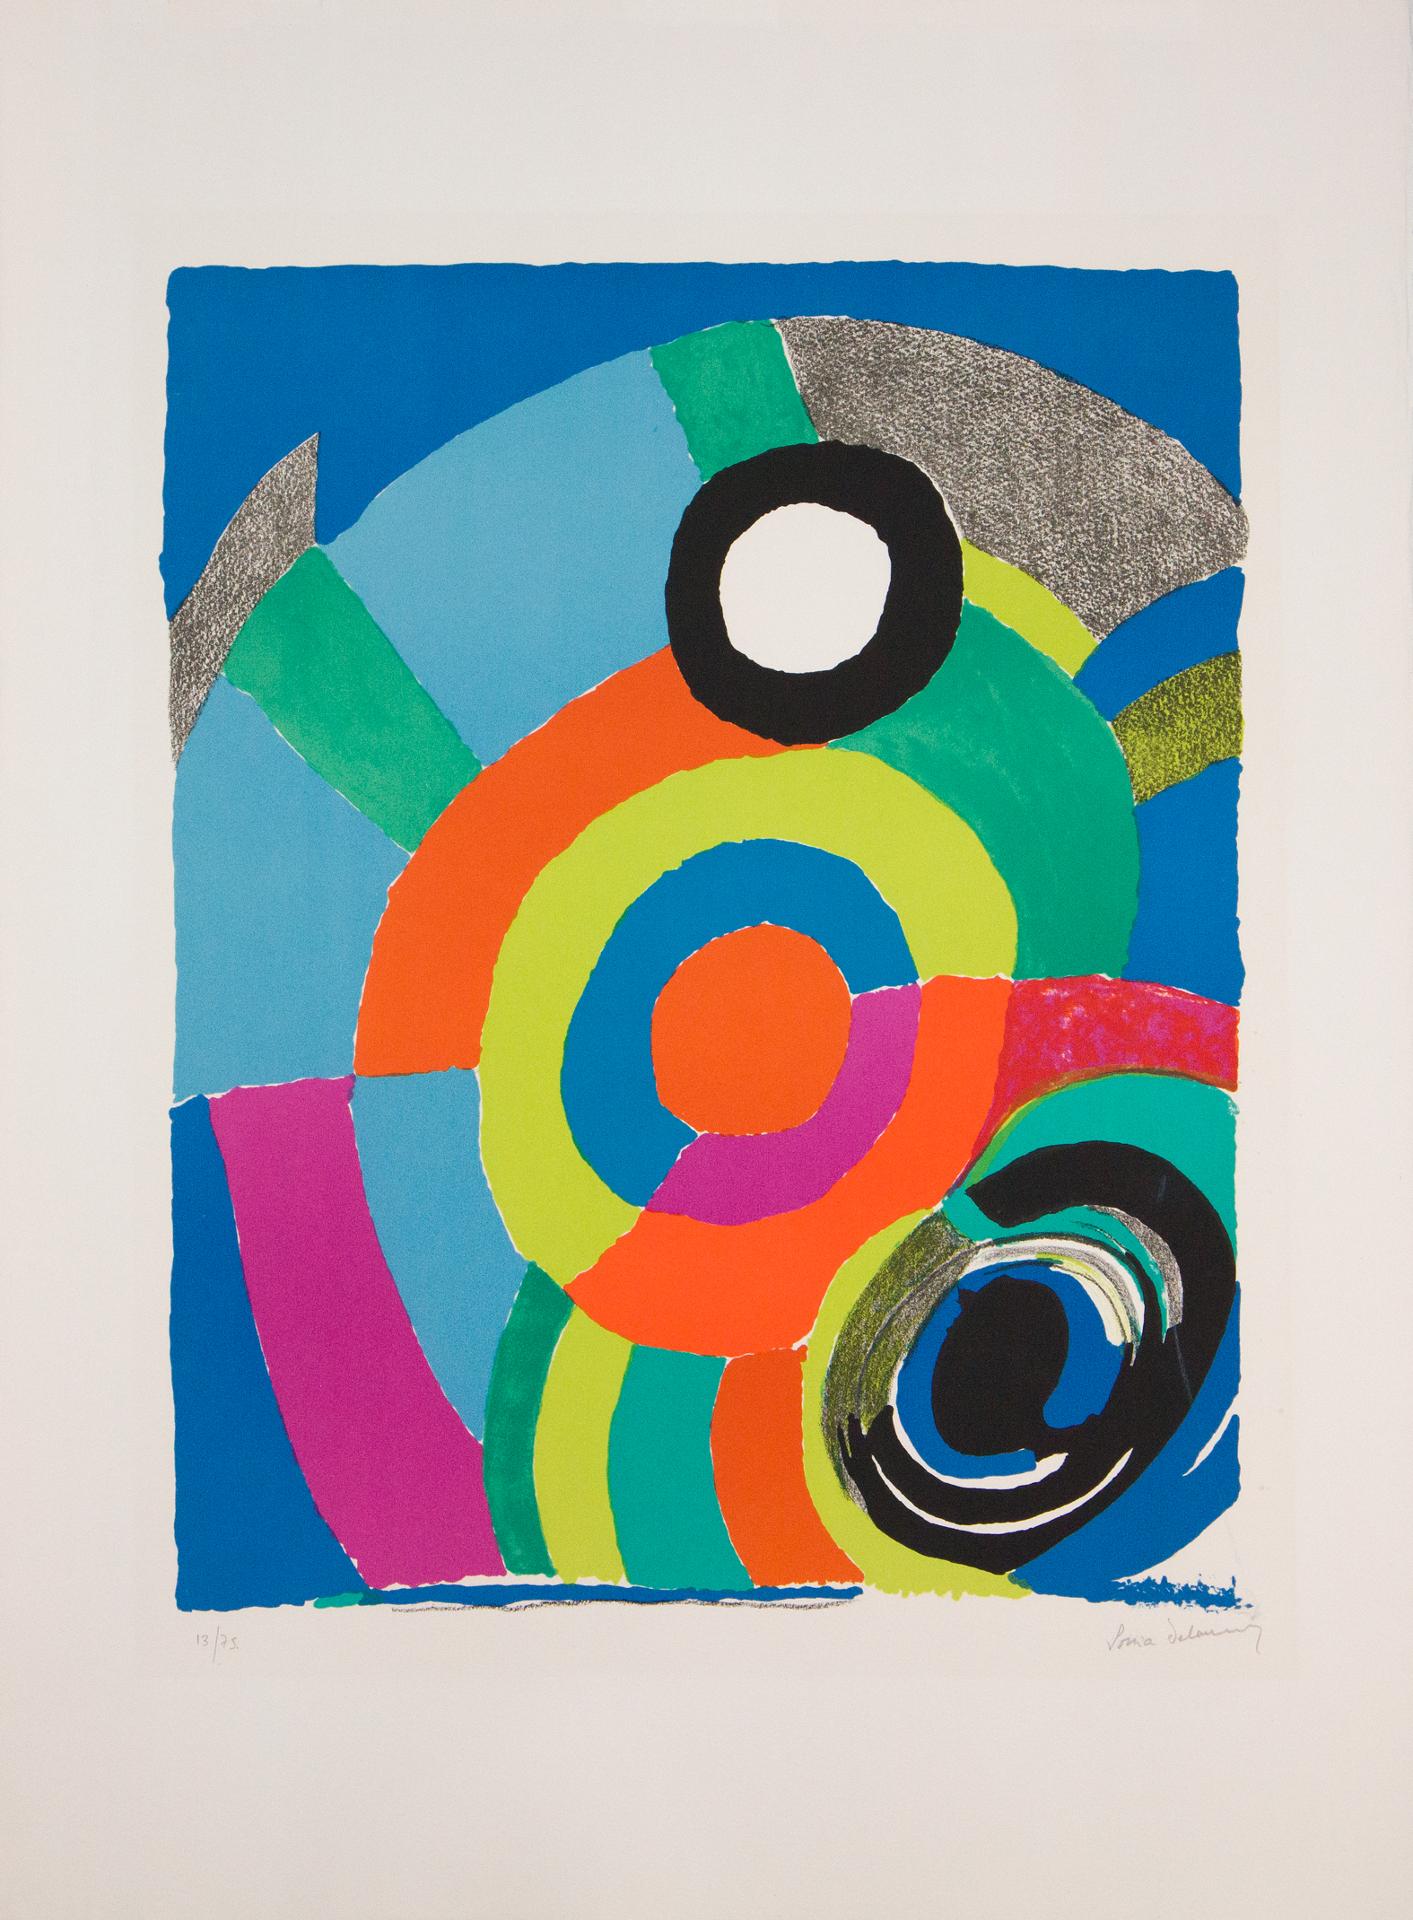 thunderbird-lithograph-printed-by-sonia-delaunay